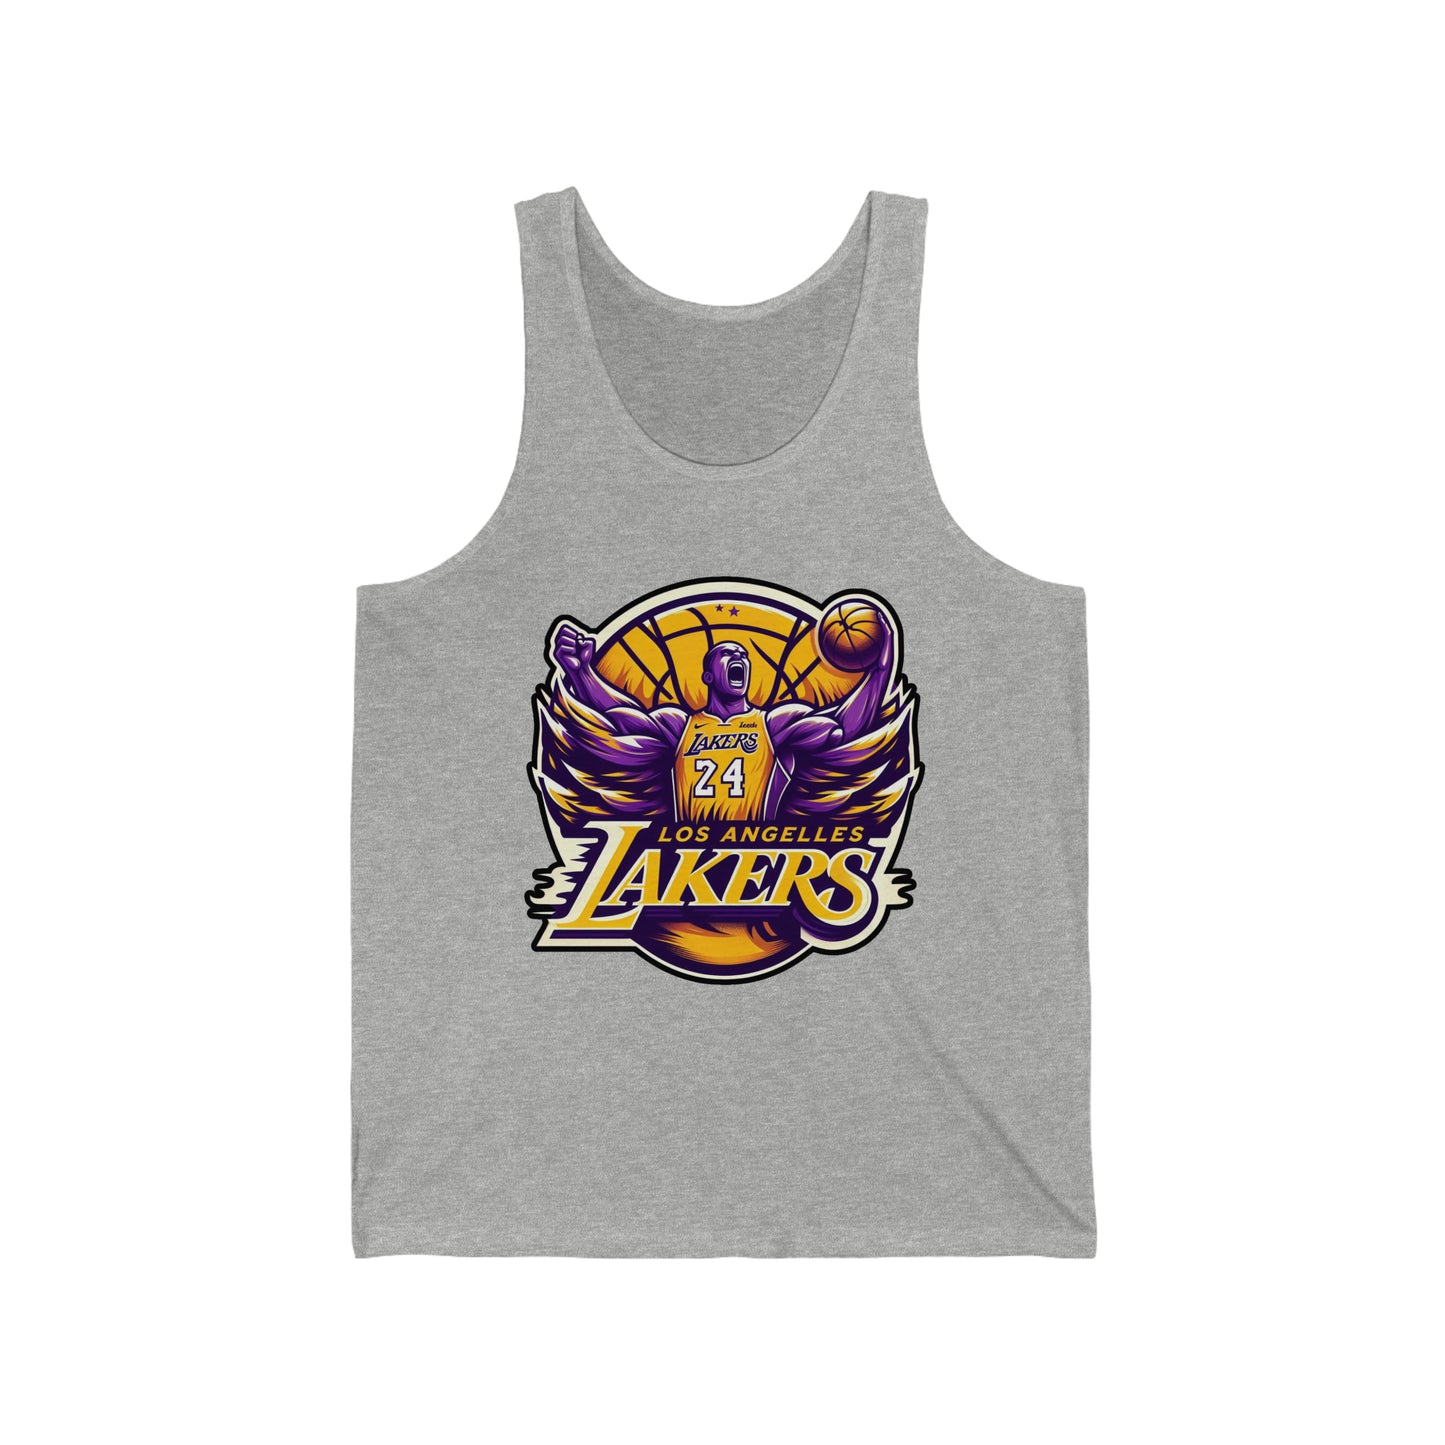 Cool and comfortable unisex Jersey Tank top (Los Angeles Lakers, NBA basketball team)